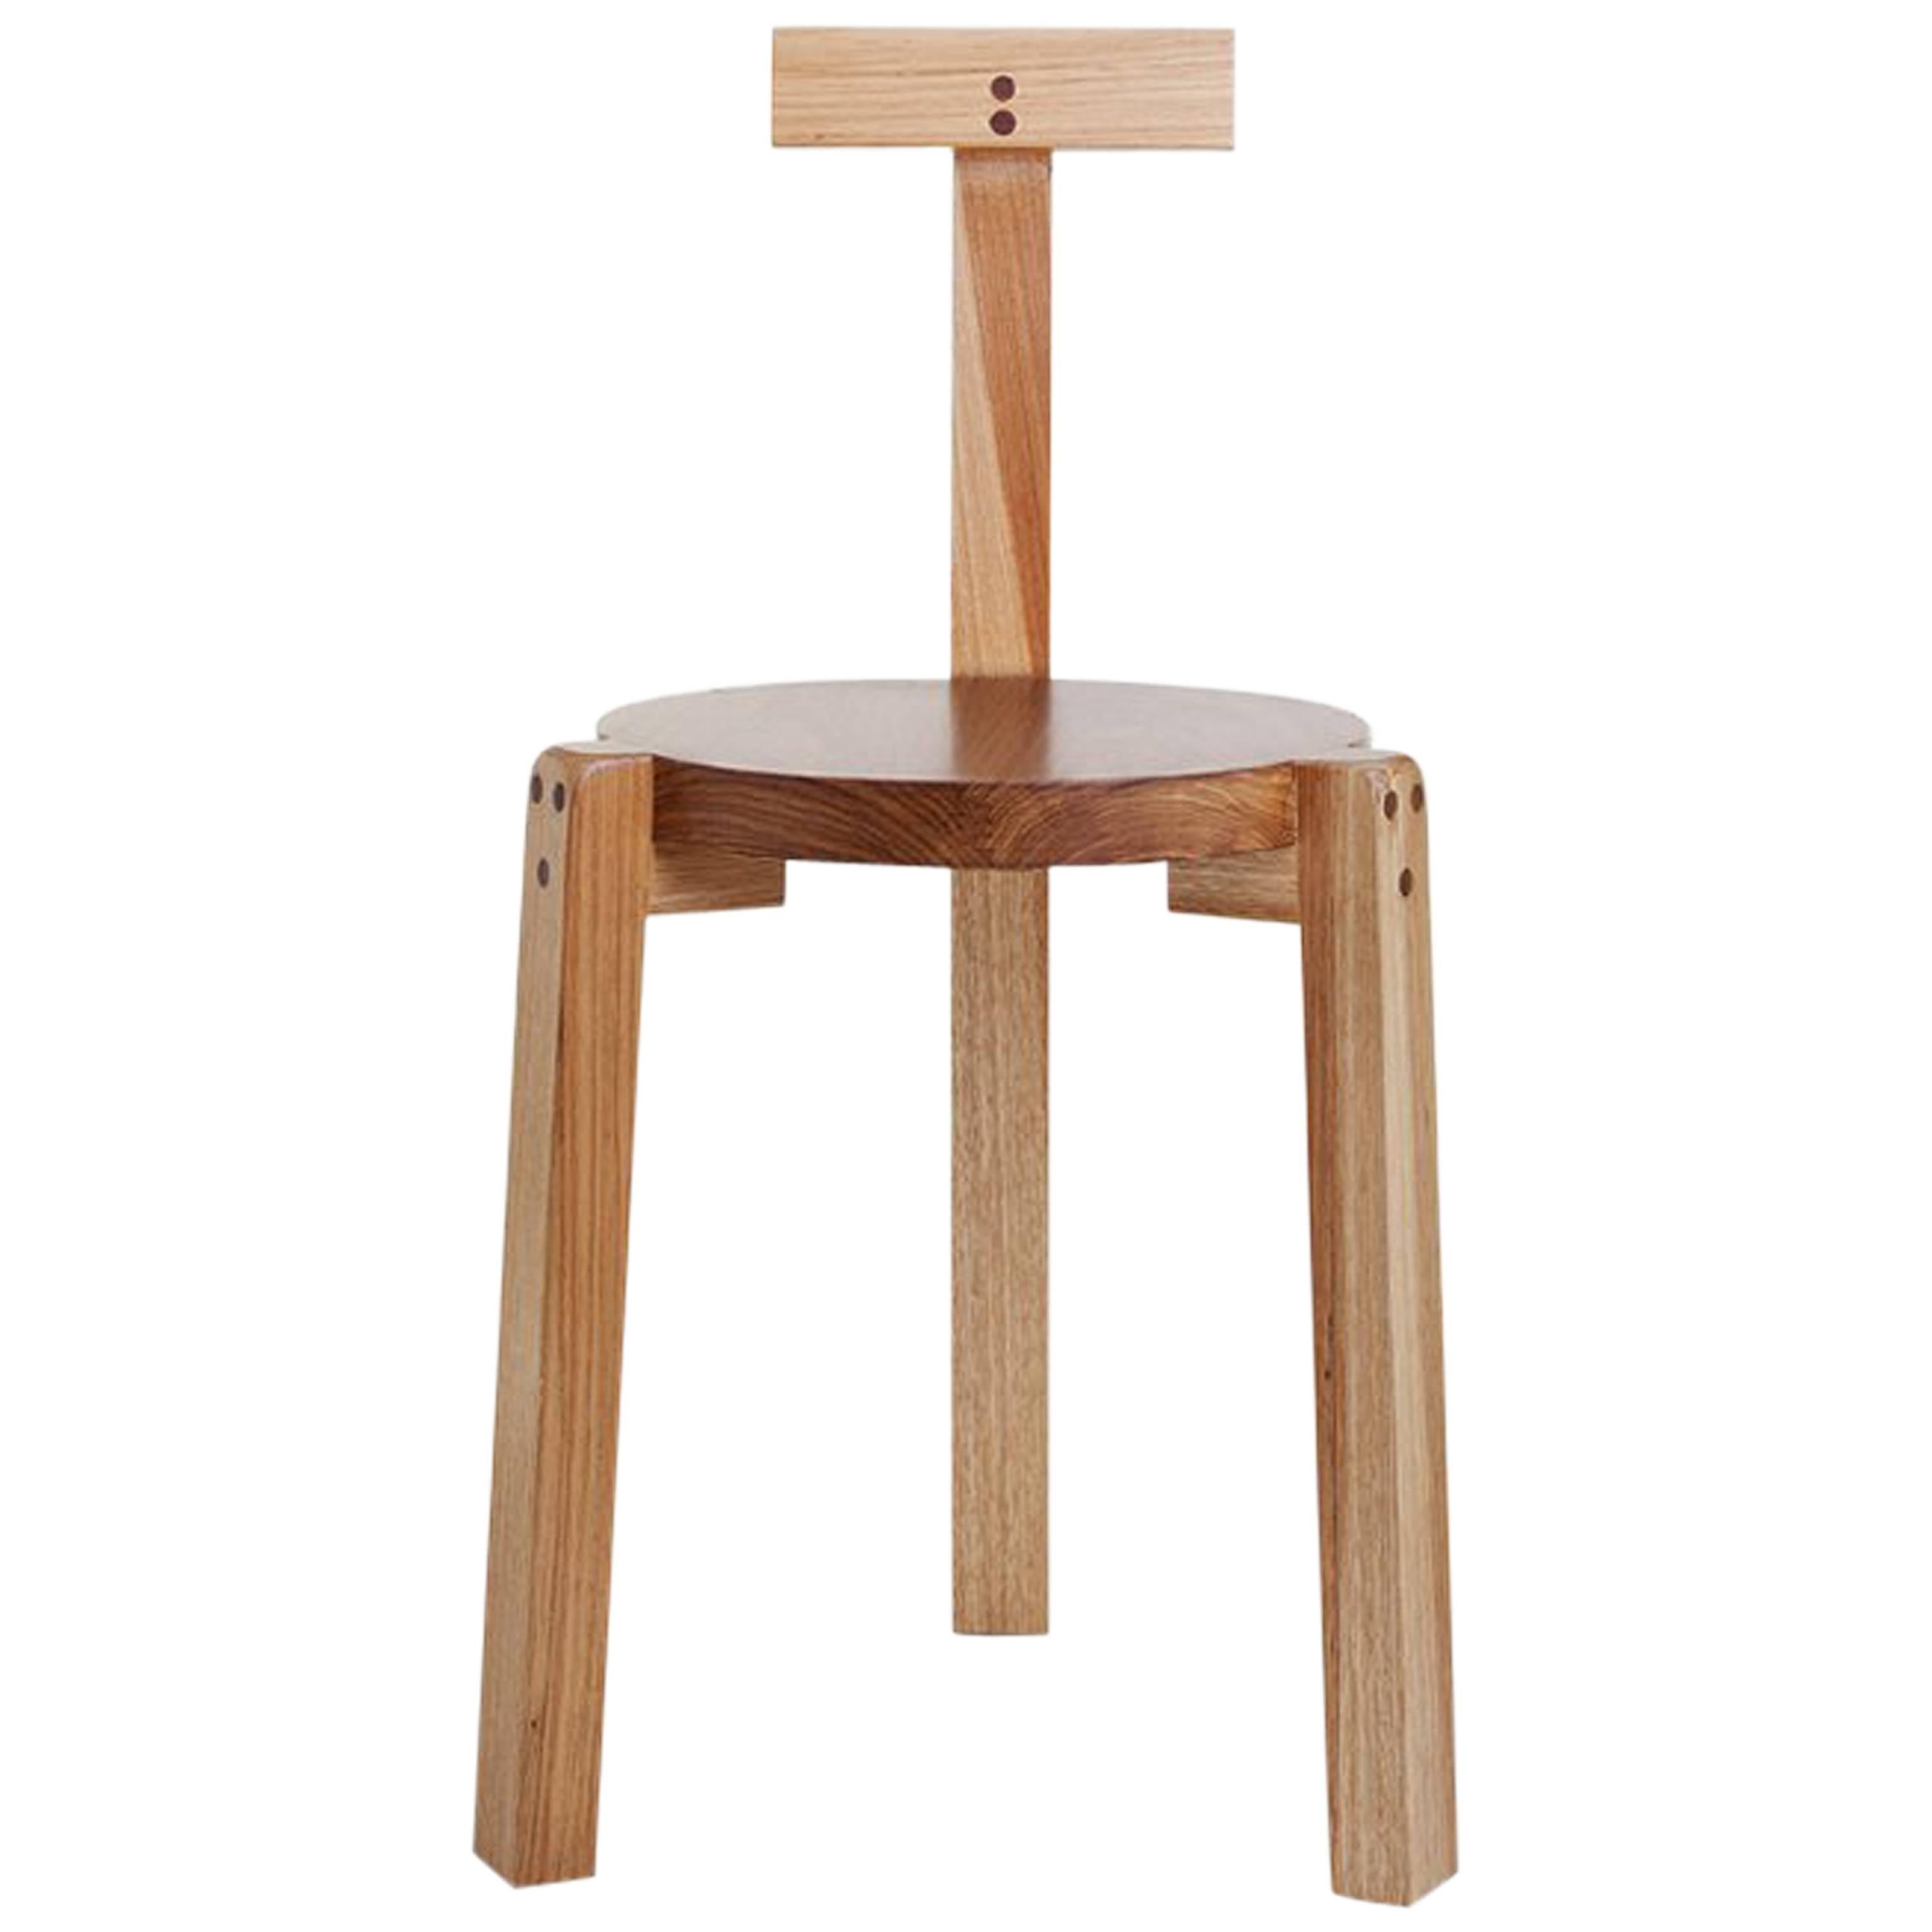 The modern Girafa chair, handmade in hardwood, was designed in 1986 by Marcelo Ferraz, Marcelo Suzuki and Lina Bo Bardi and is an icon of Brazilian modern design. 
Due to its unique shapes, in 2016, the Girafa chair was incorporated into the